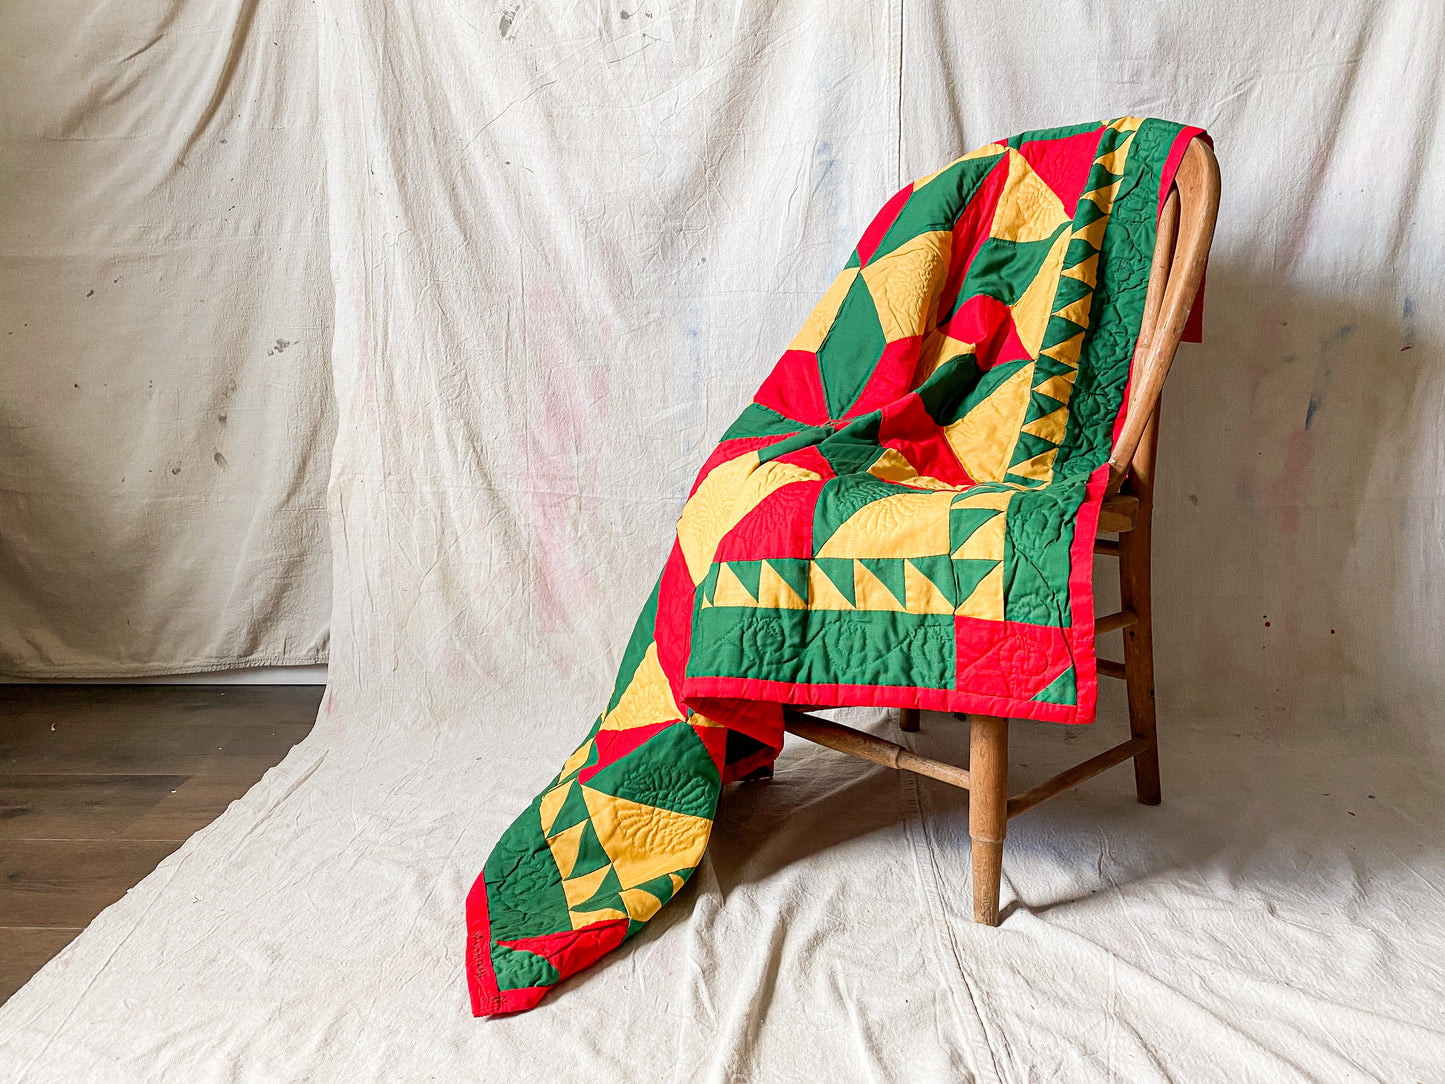 Vintage Quilted Wall Hanging Lap Quilt | Signed Red Yellow Green Broken Star with Sawtooth Border Quilt